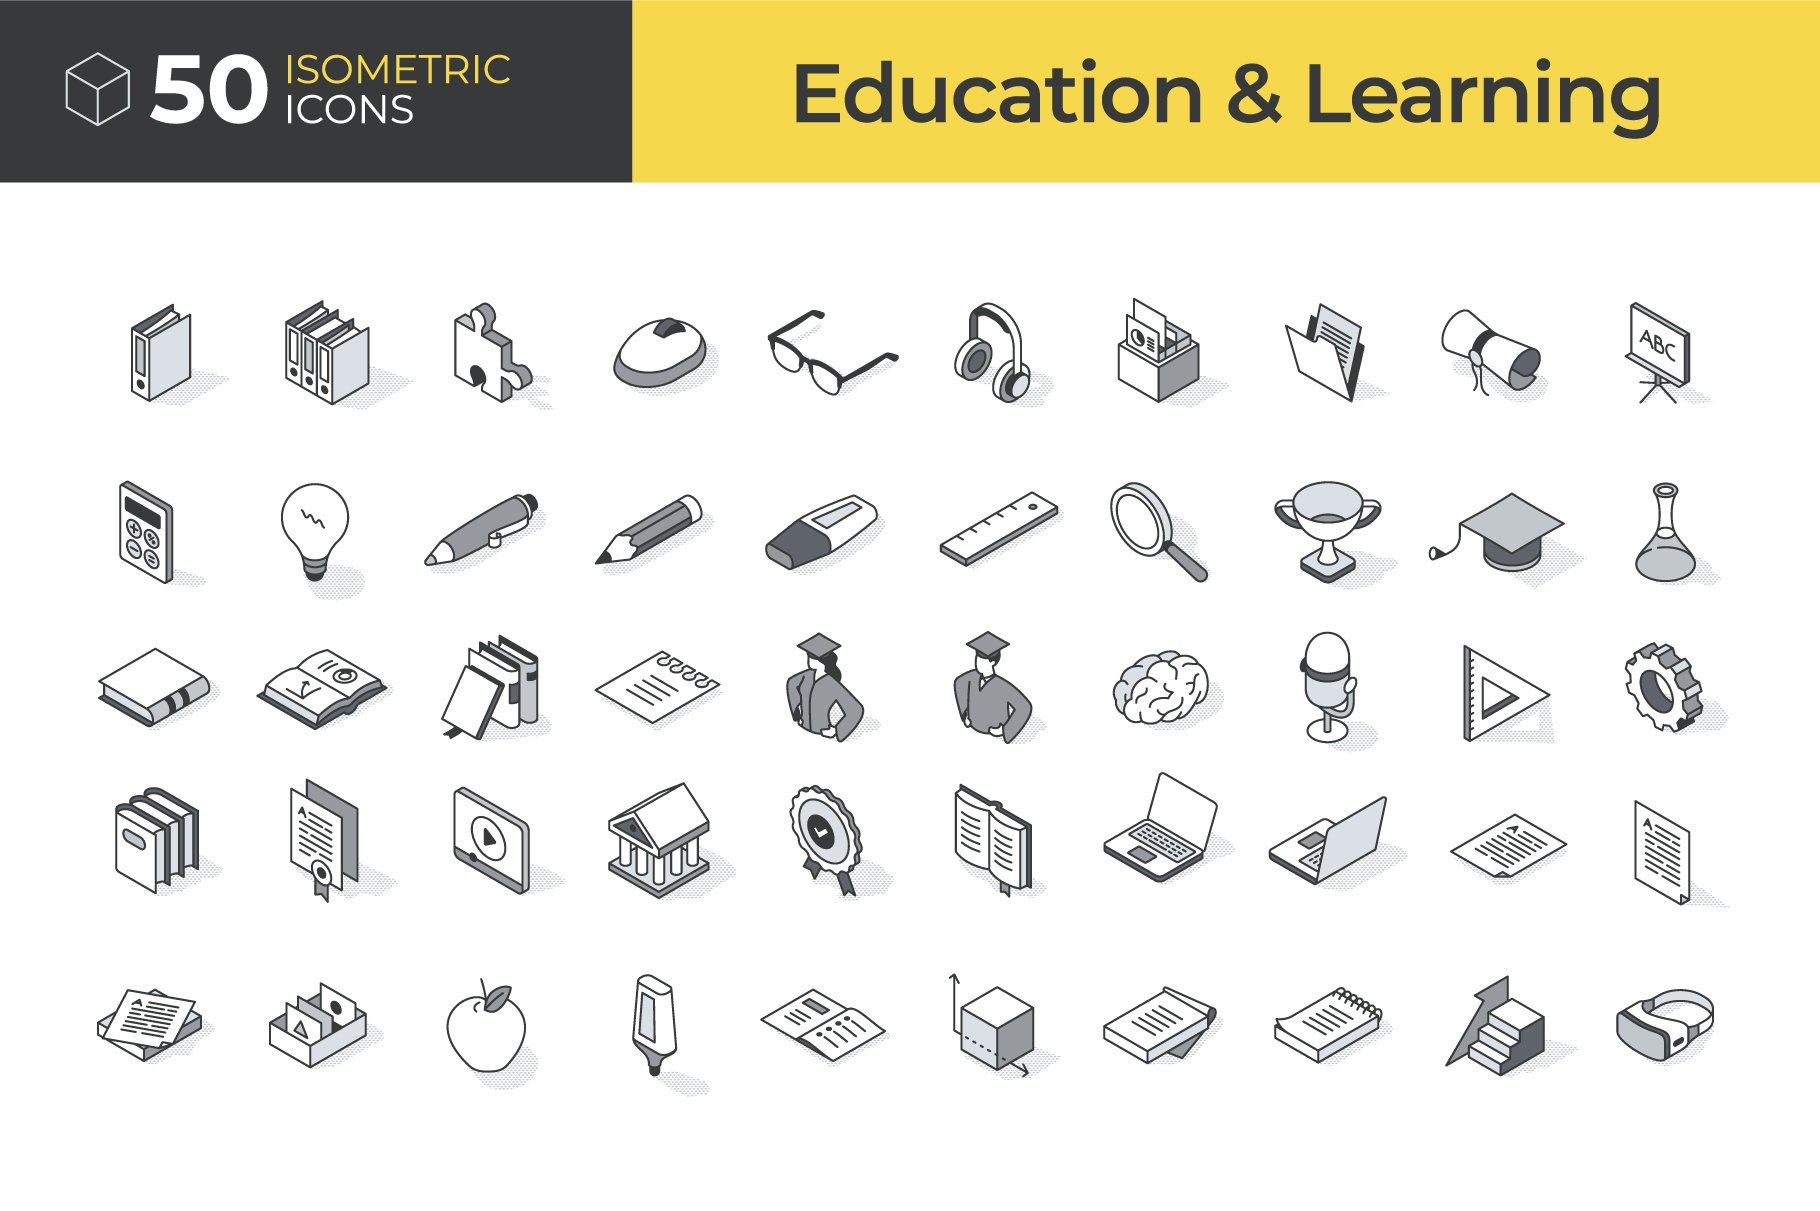 Isometric, 50 Icons | Education cover image.